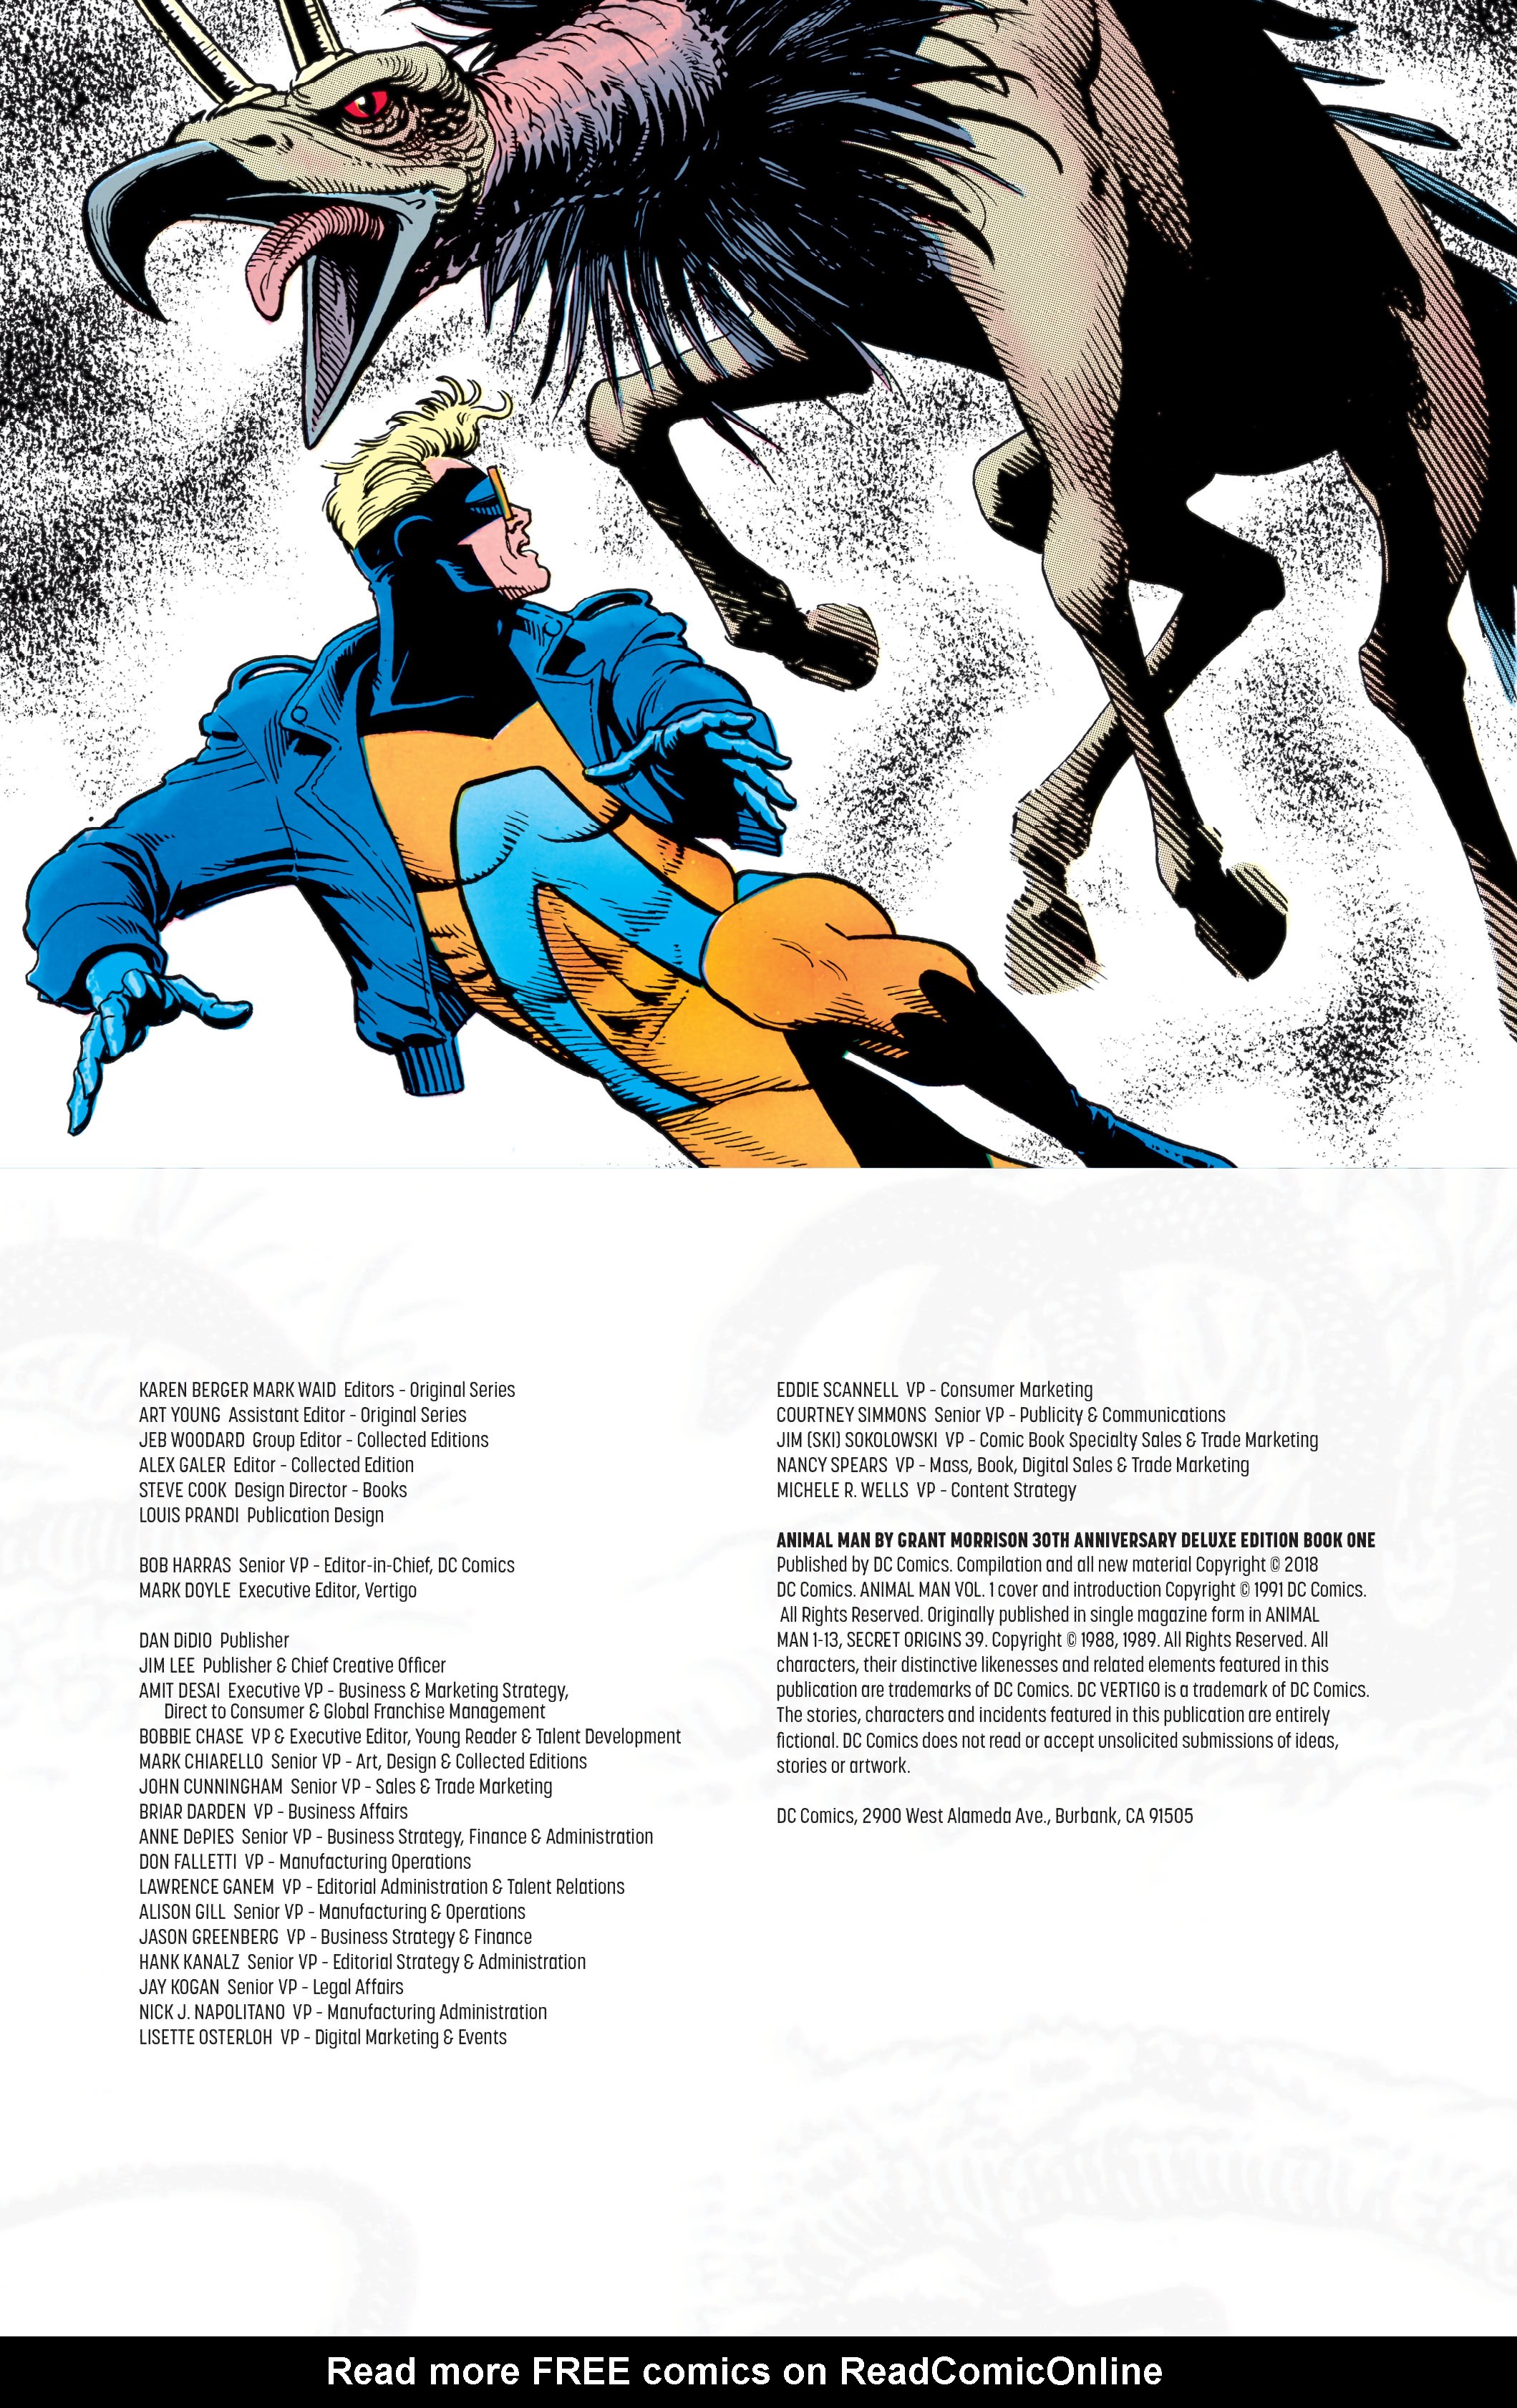 Read online Animal Man (1988) comic -  Issue # _ by Grant Morrison 30th Anniversary Deluxe Edition Book 1 (Part 1) - 3